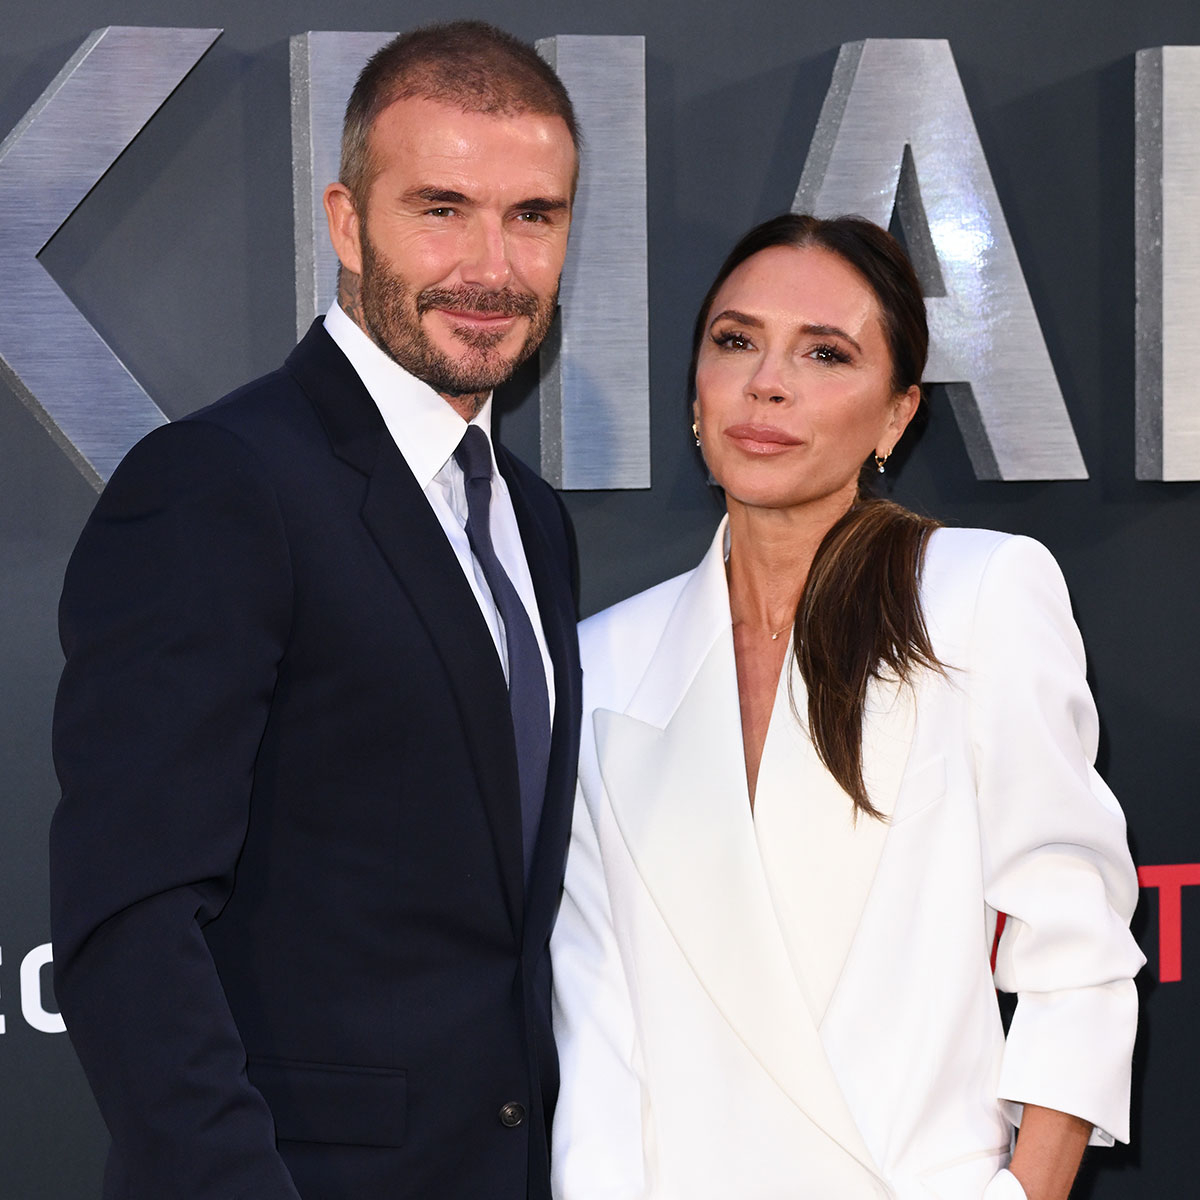 David Beckham is spotted in Paris with wife Victoria